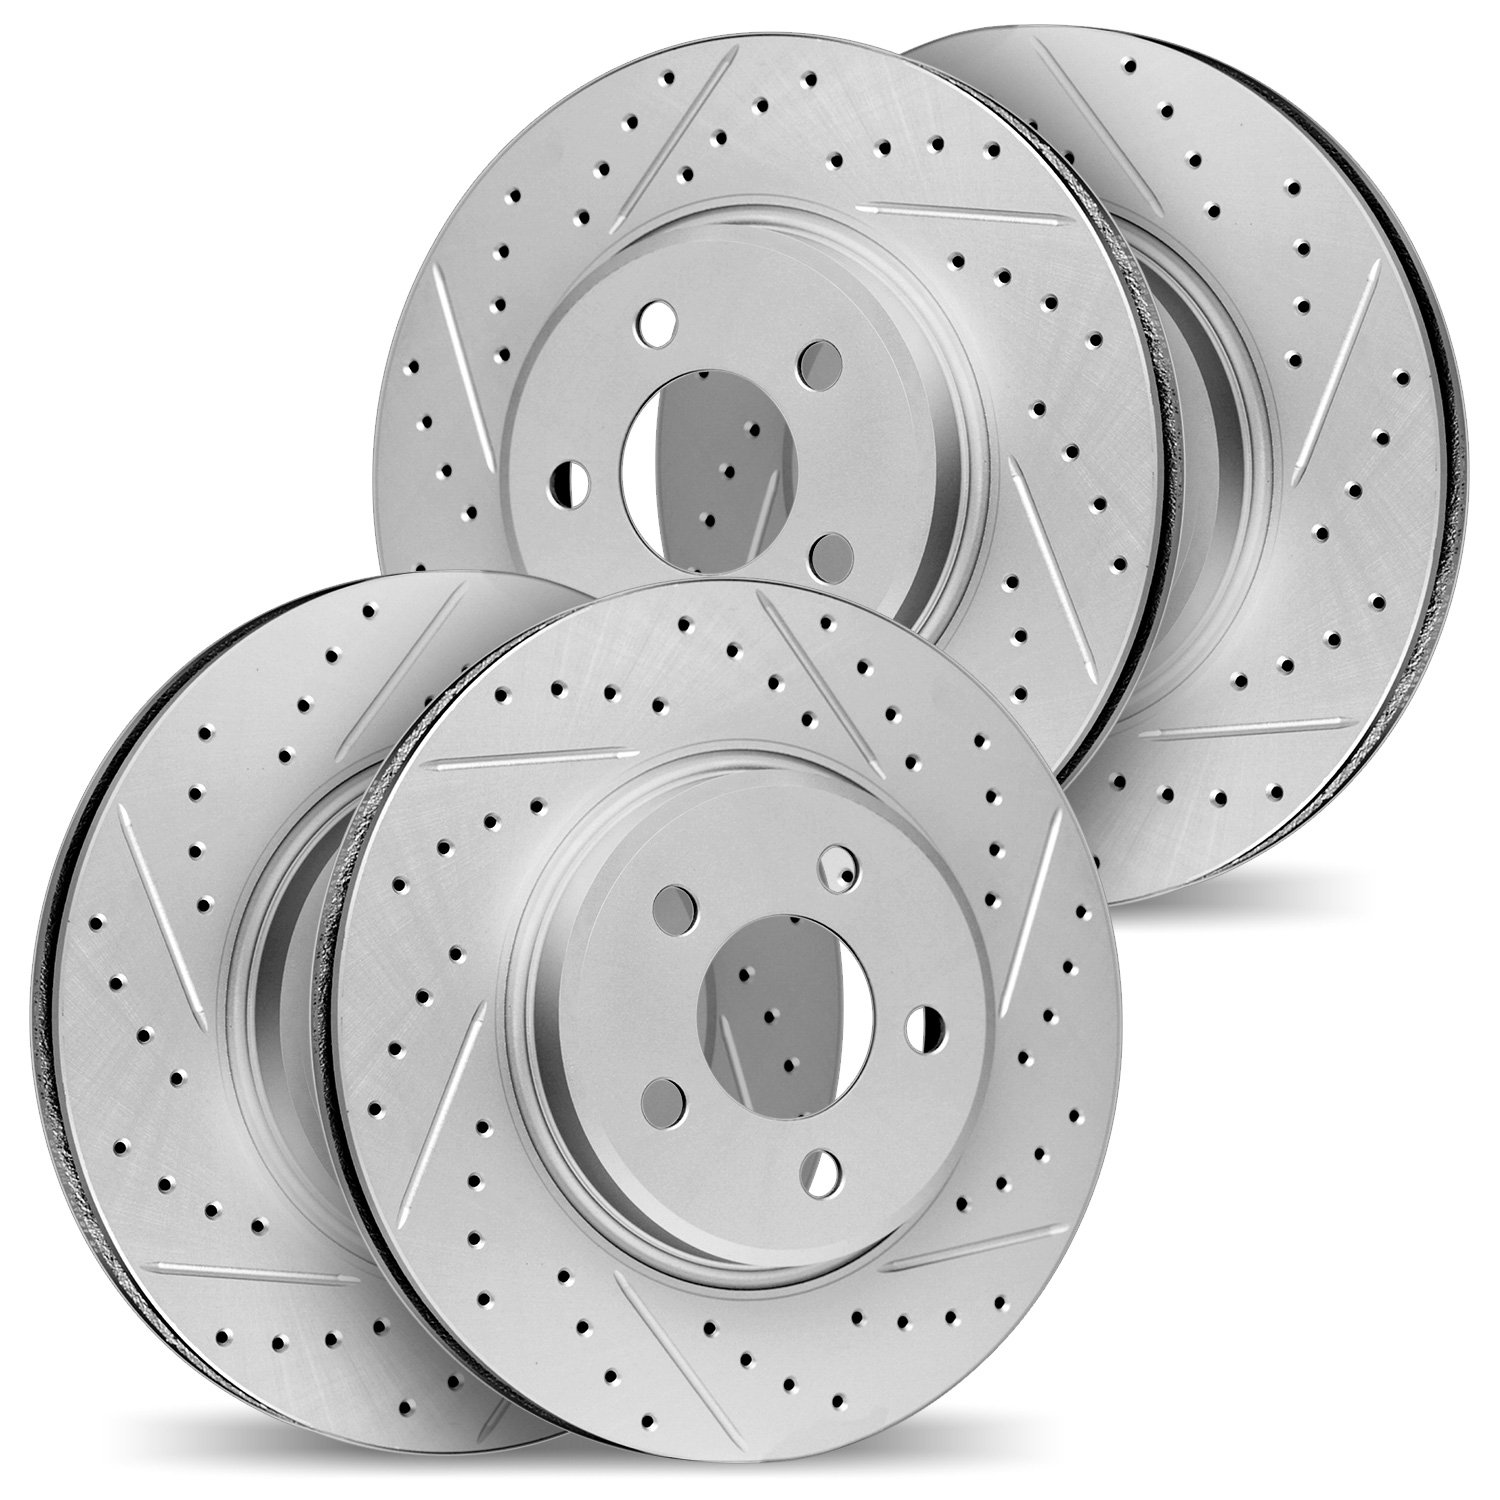 2004-31022 Geoperformance Drilled/Slotted Brake Rotors, 2012-2020 BMW, Position: Front and Rear